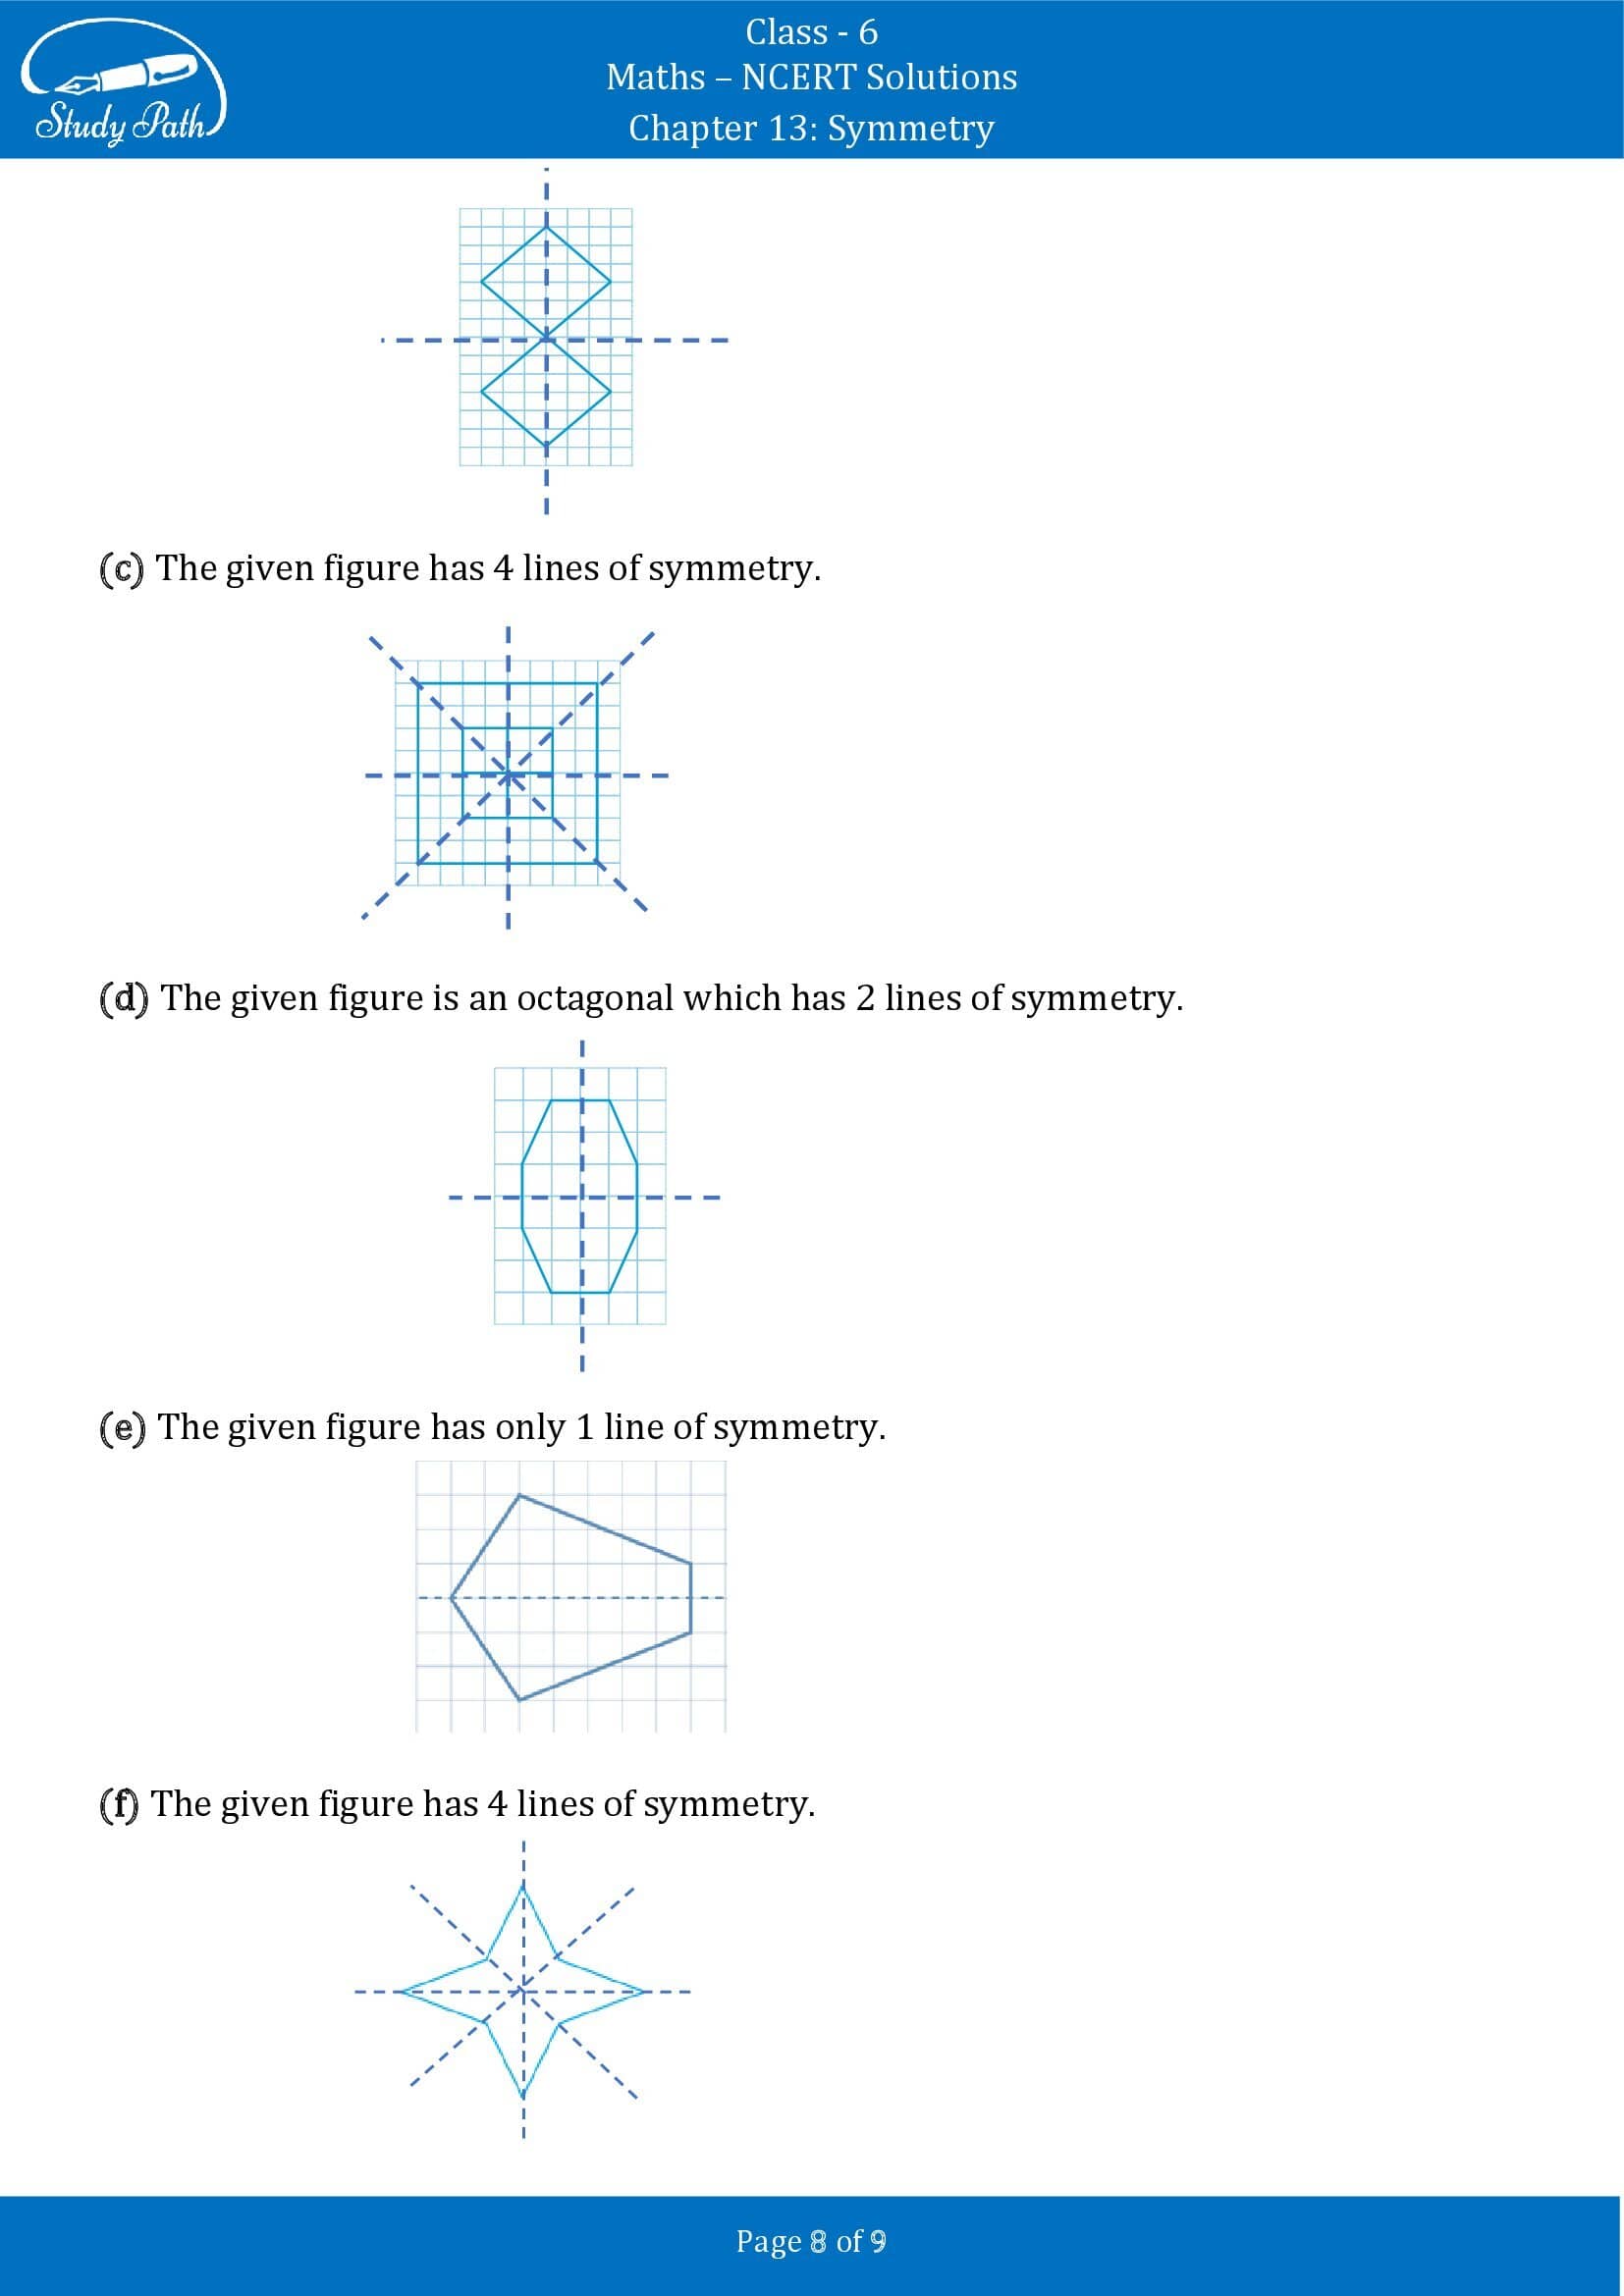 NCERT Solutions for Class 6 Maths Chapter 13 Symmetry Exercise 13.2 00008